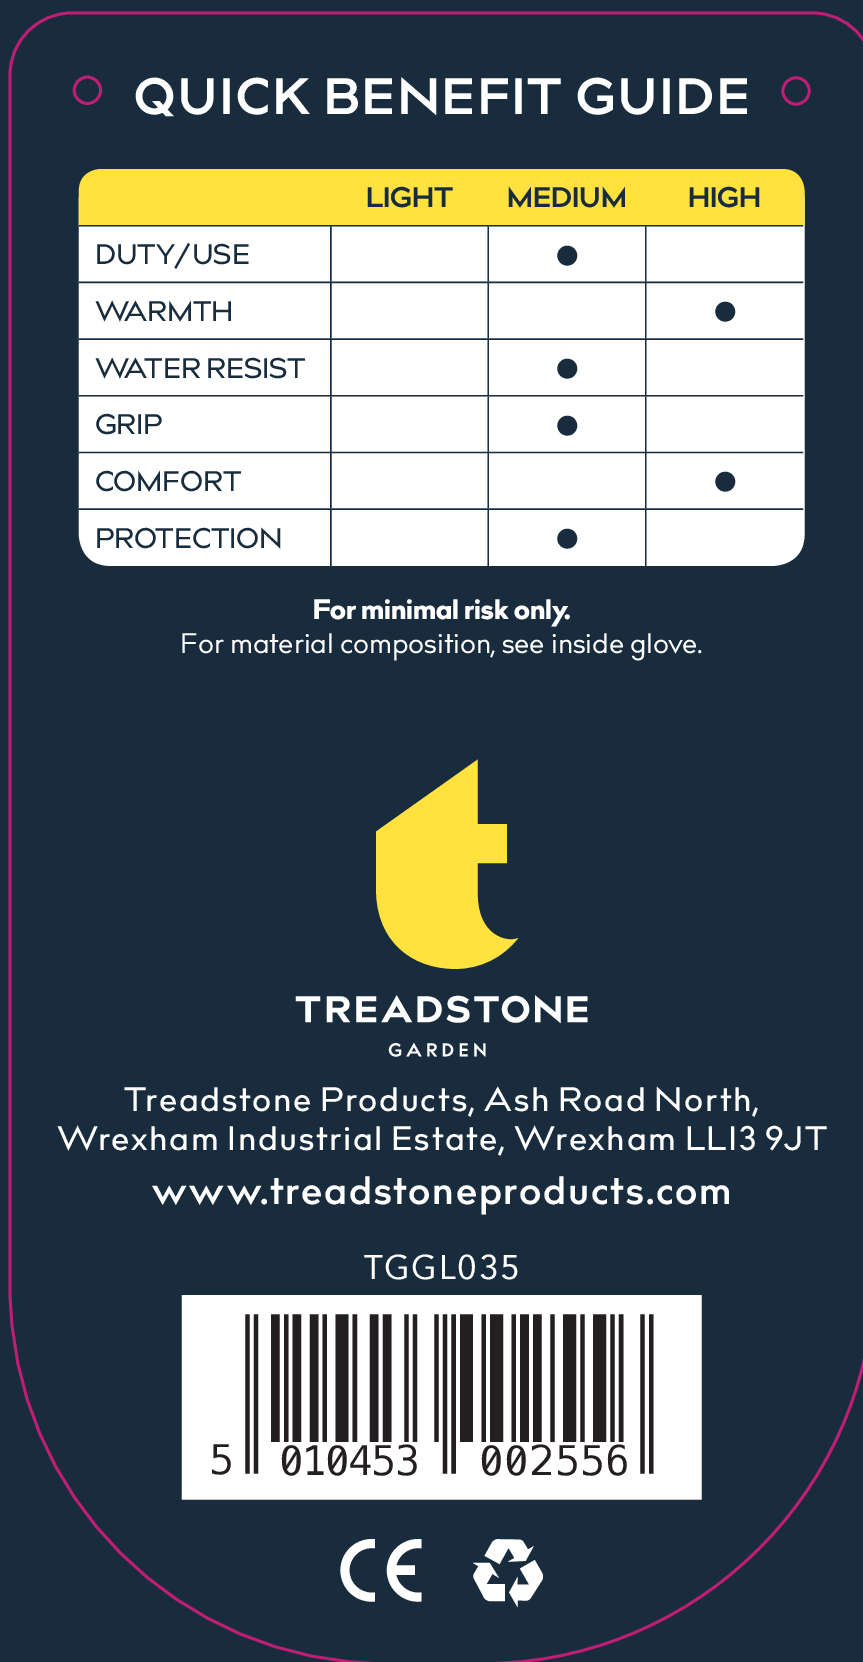 WINTER - Treadstone Products